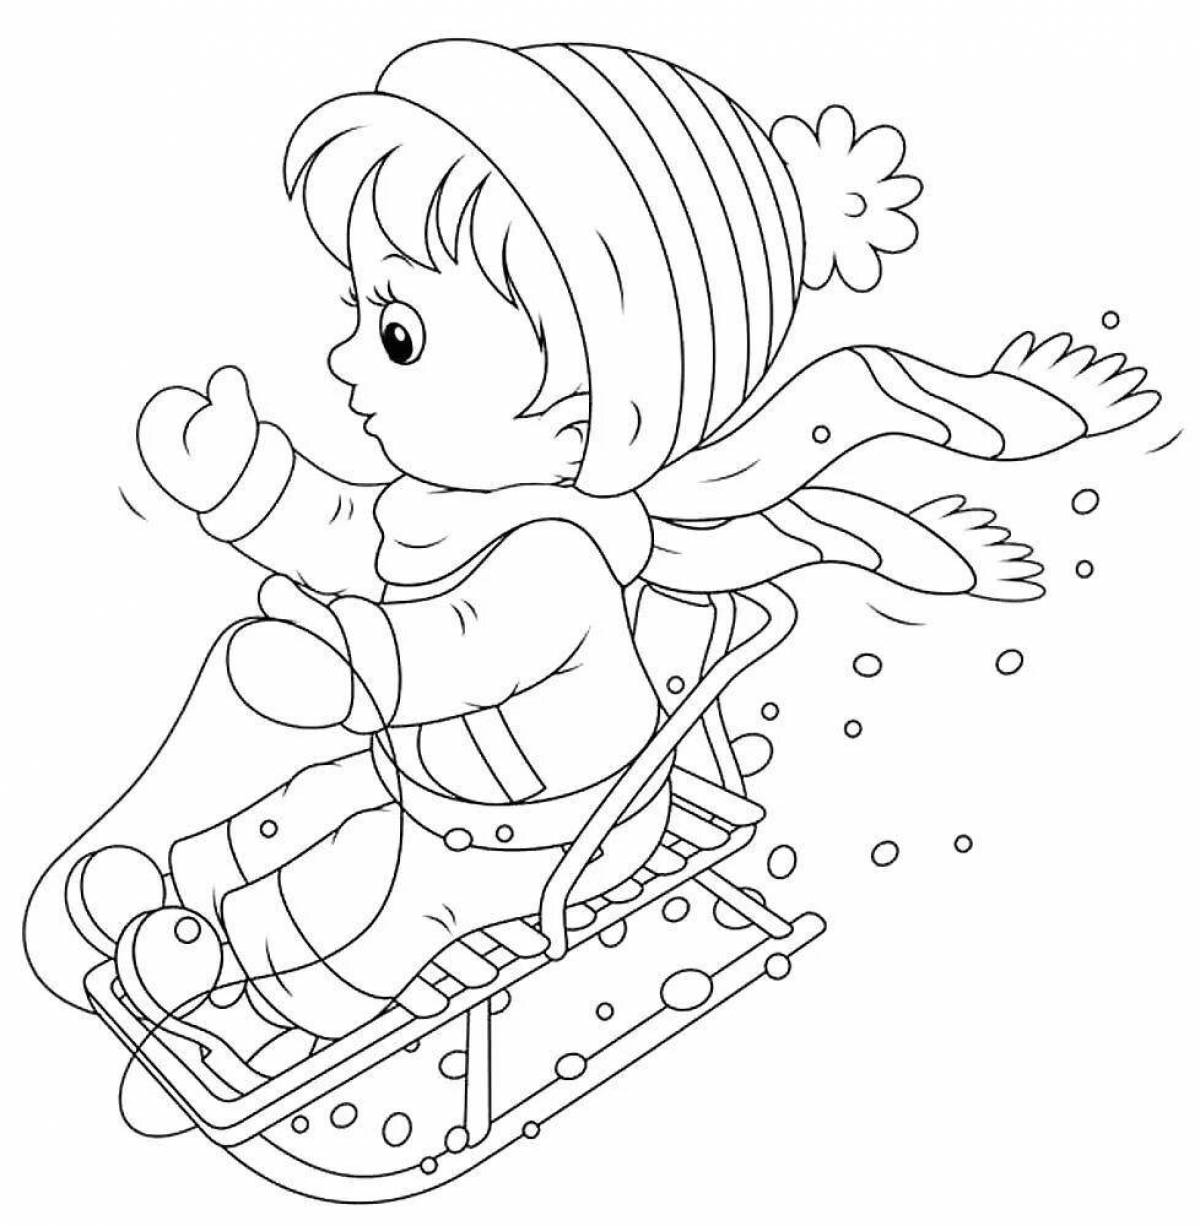 Coloring page happy child on a sled